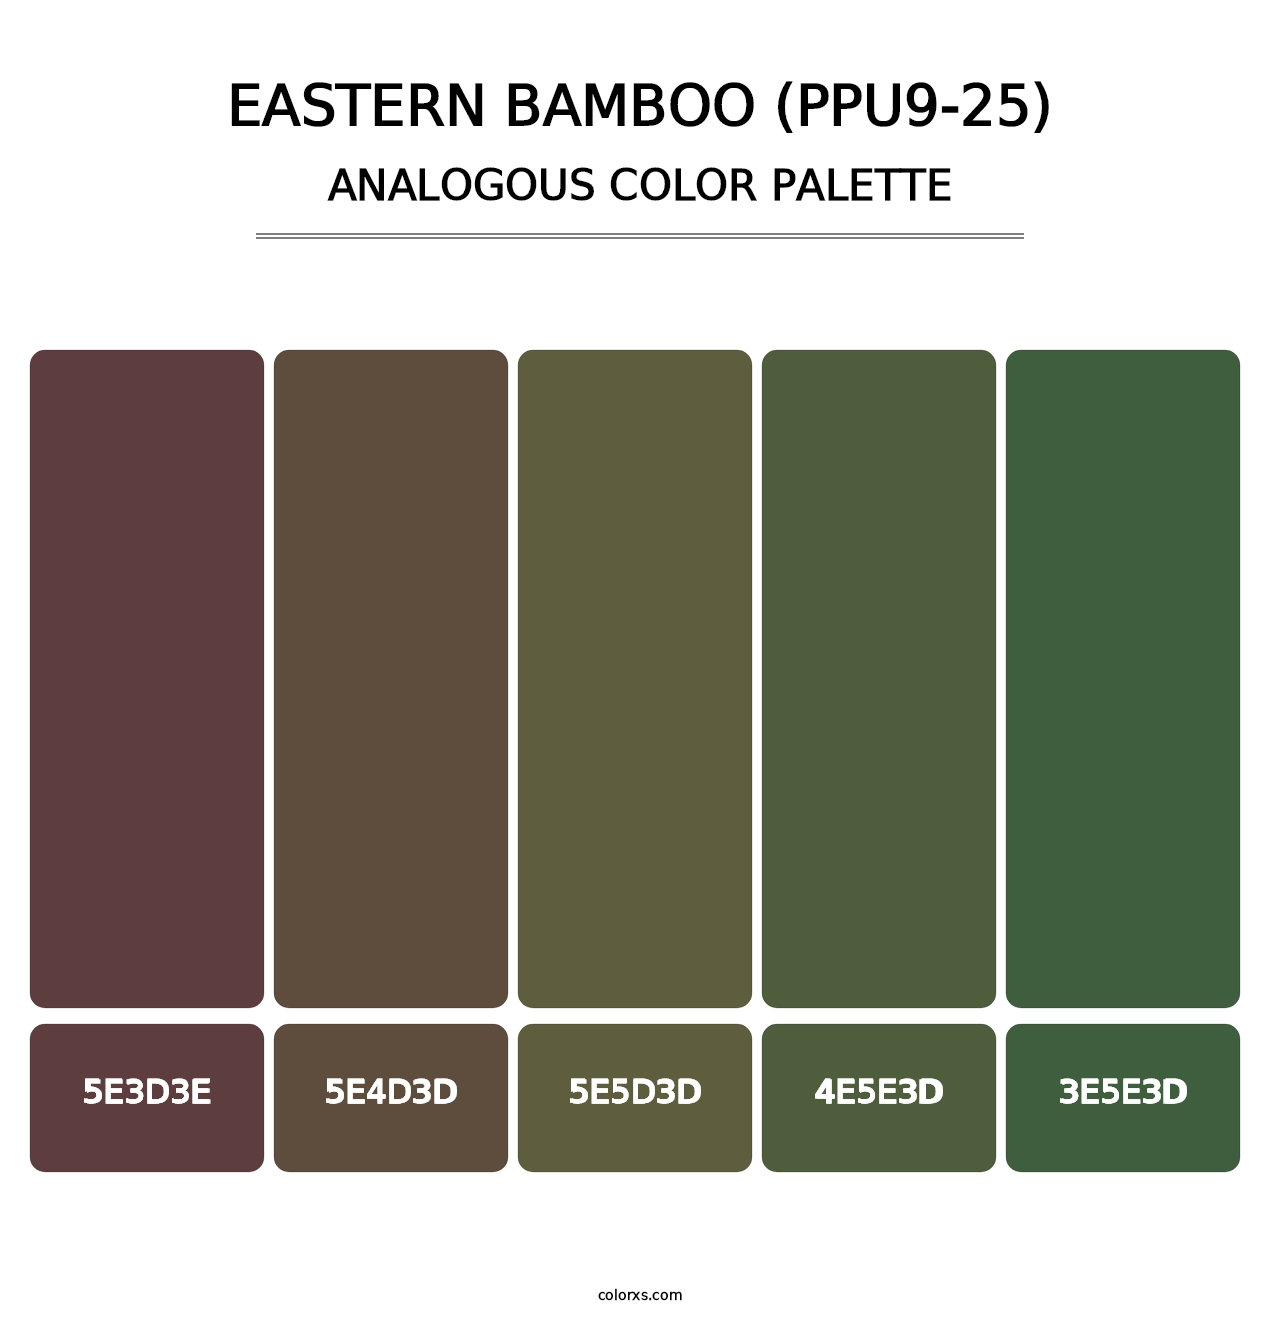 Eastern Bamboo (PPU9-25) - Analogous Color Palette